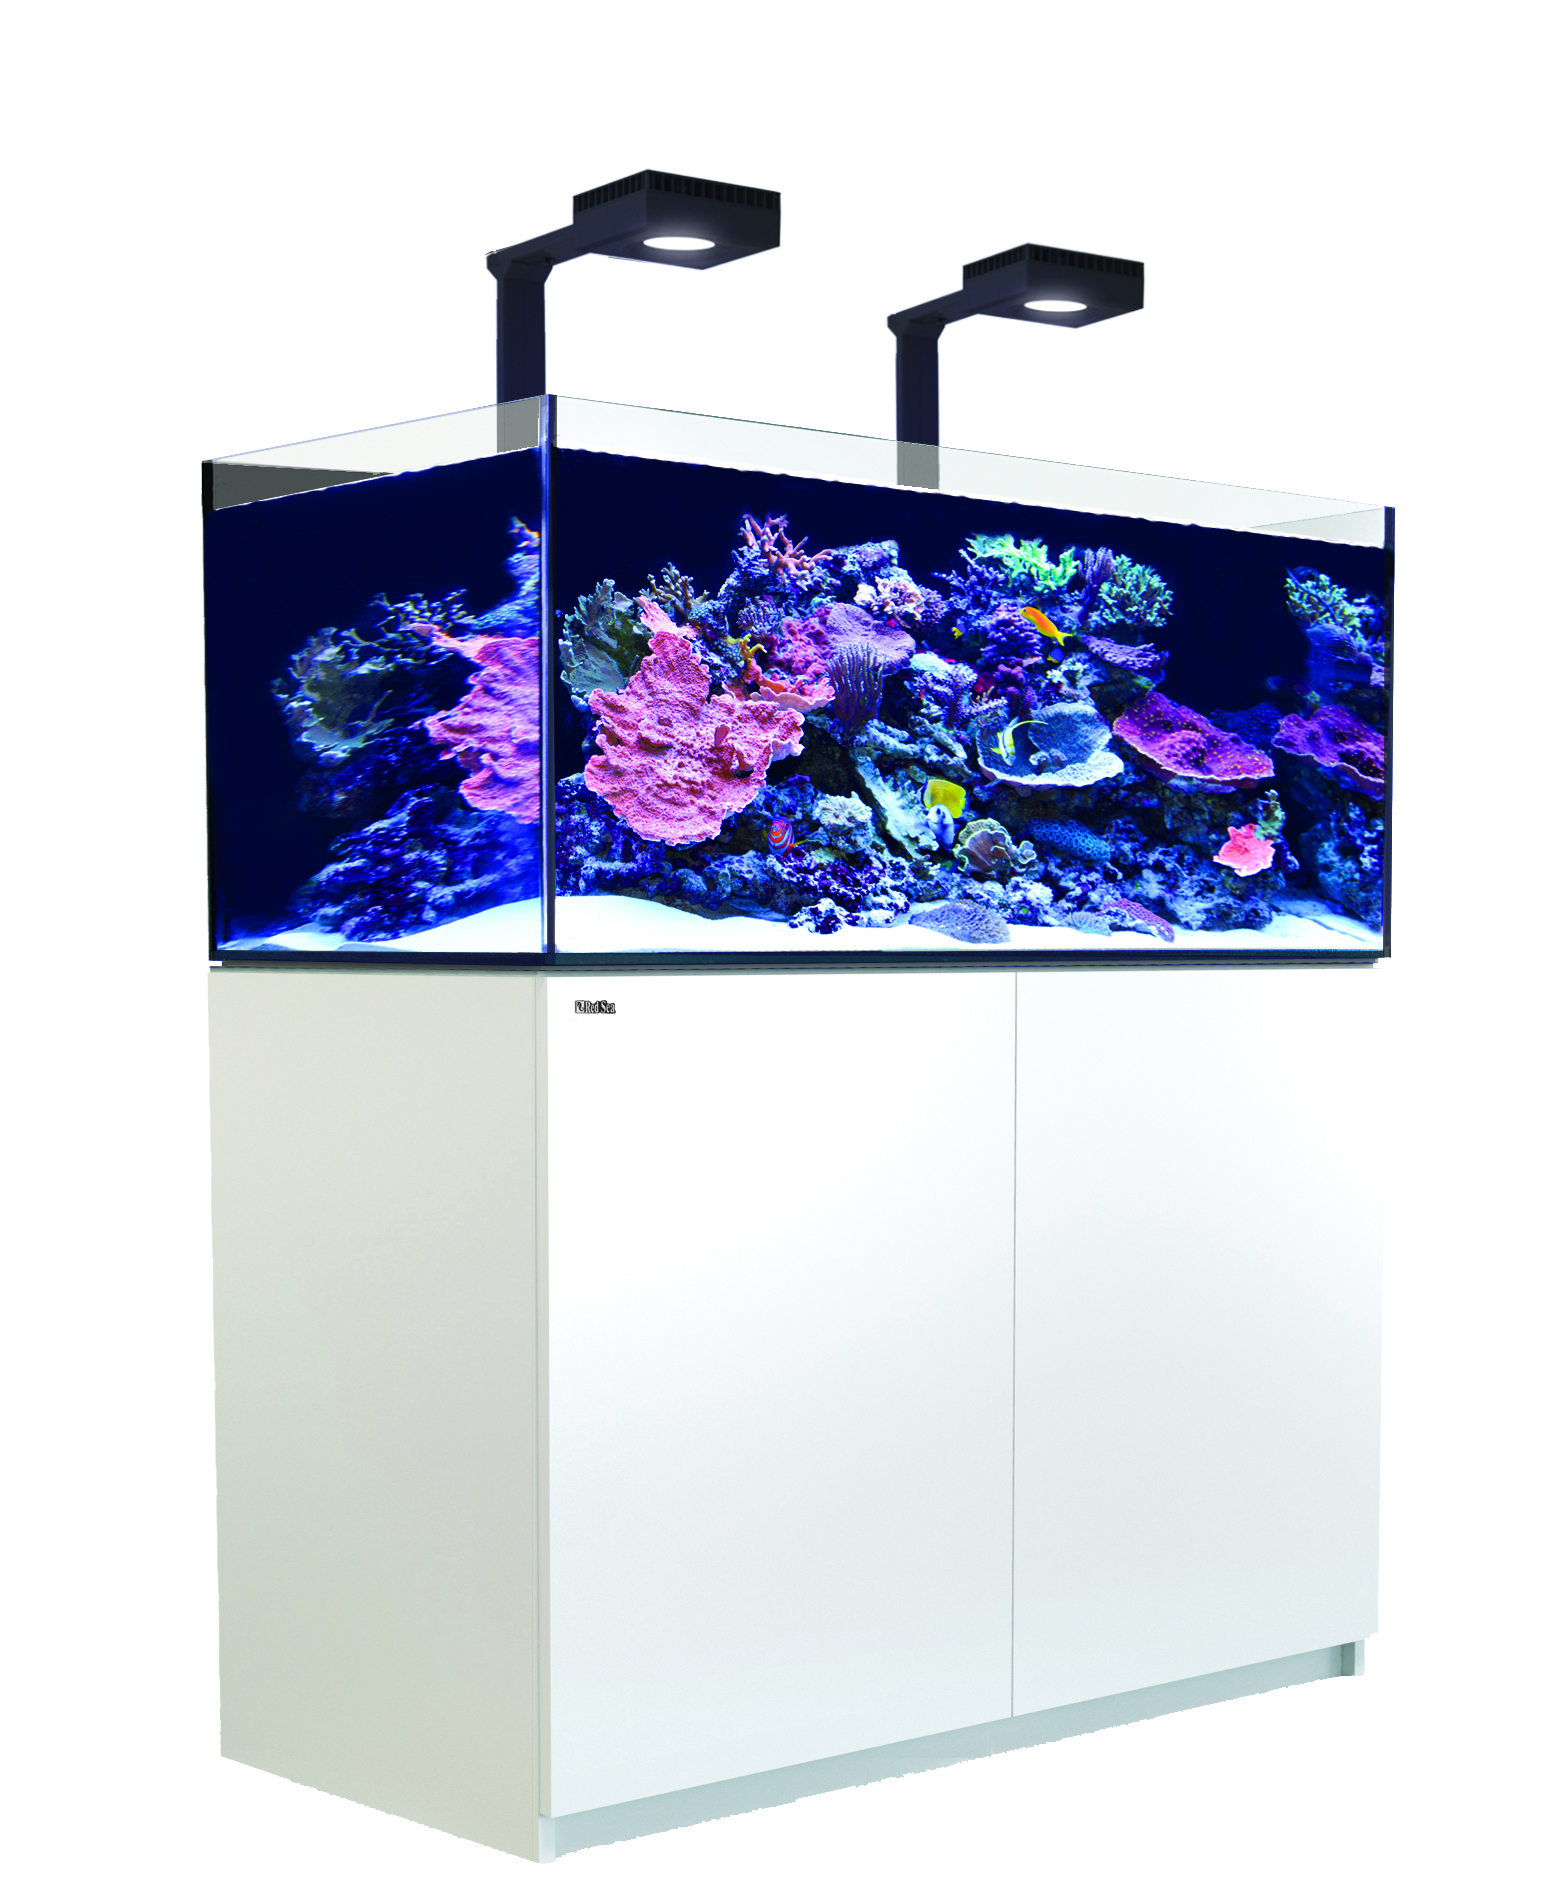 Red Sea REEFER XL425 G2+ Deluxe System - White (incl. 2 x RL 90 & Mount arms)